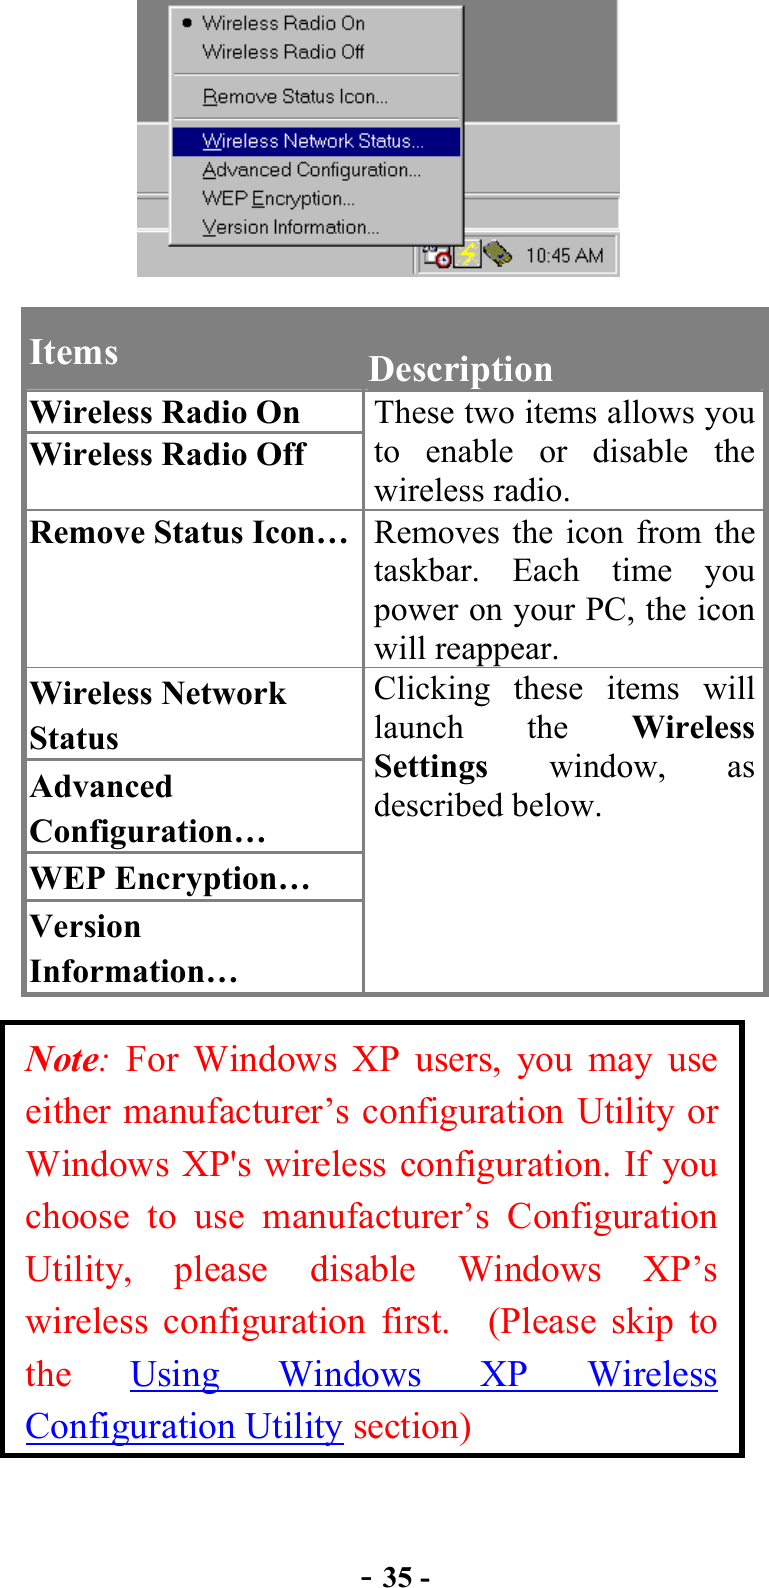  - 35 -  Items  Description Wireless Radio On Wireless Radio Off These two items allows you to enable or disable the wireless radio. Remove Status Icon…  Removes the icon from the taskbar. Each time you power on your PC, the icon will reappear. Wireless Network Status Advanced Configuration… WEP Encryption… Version Information… Clicking these items will launch the Wireless Settings window, as described below. Note: For Windows XP users, you may use either manufacturer’s configuration Utility or Windows XP&apos;s wireless configuration. If you choose to use manufacturer’s Configuration Utility, please disable Windows XP’s wireless configuration first.  (Please skip to the  Using Windows XP Wireless Configuration Utility section) 